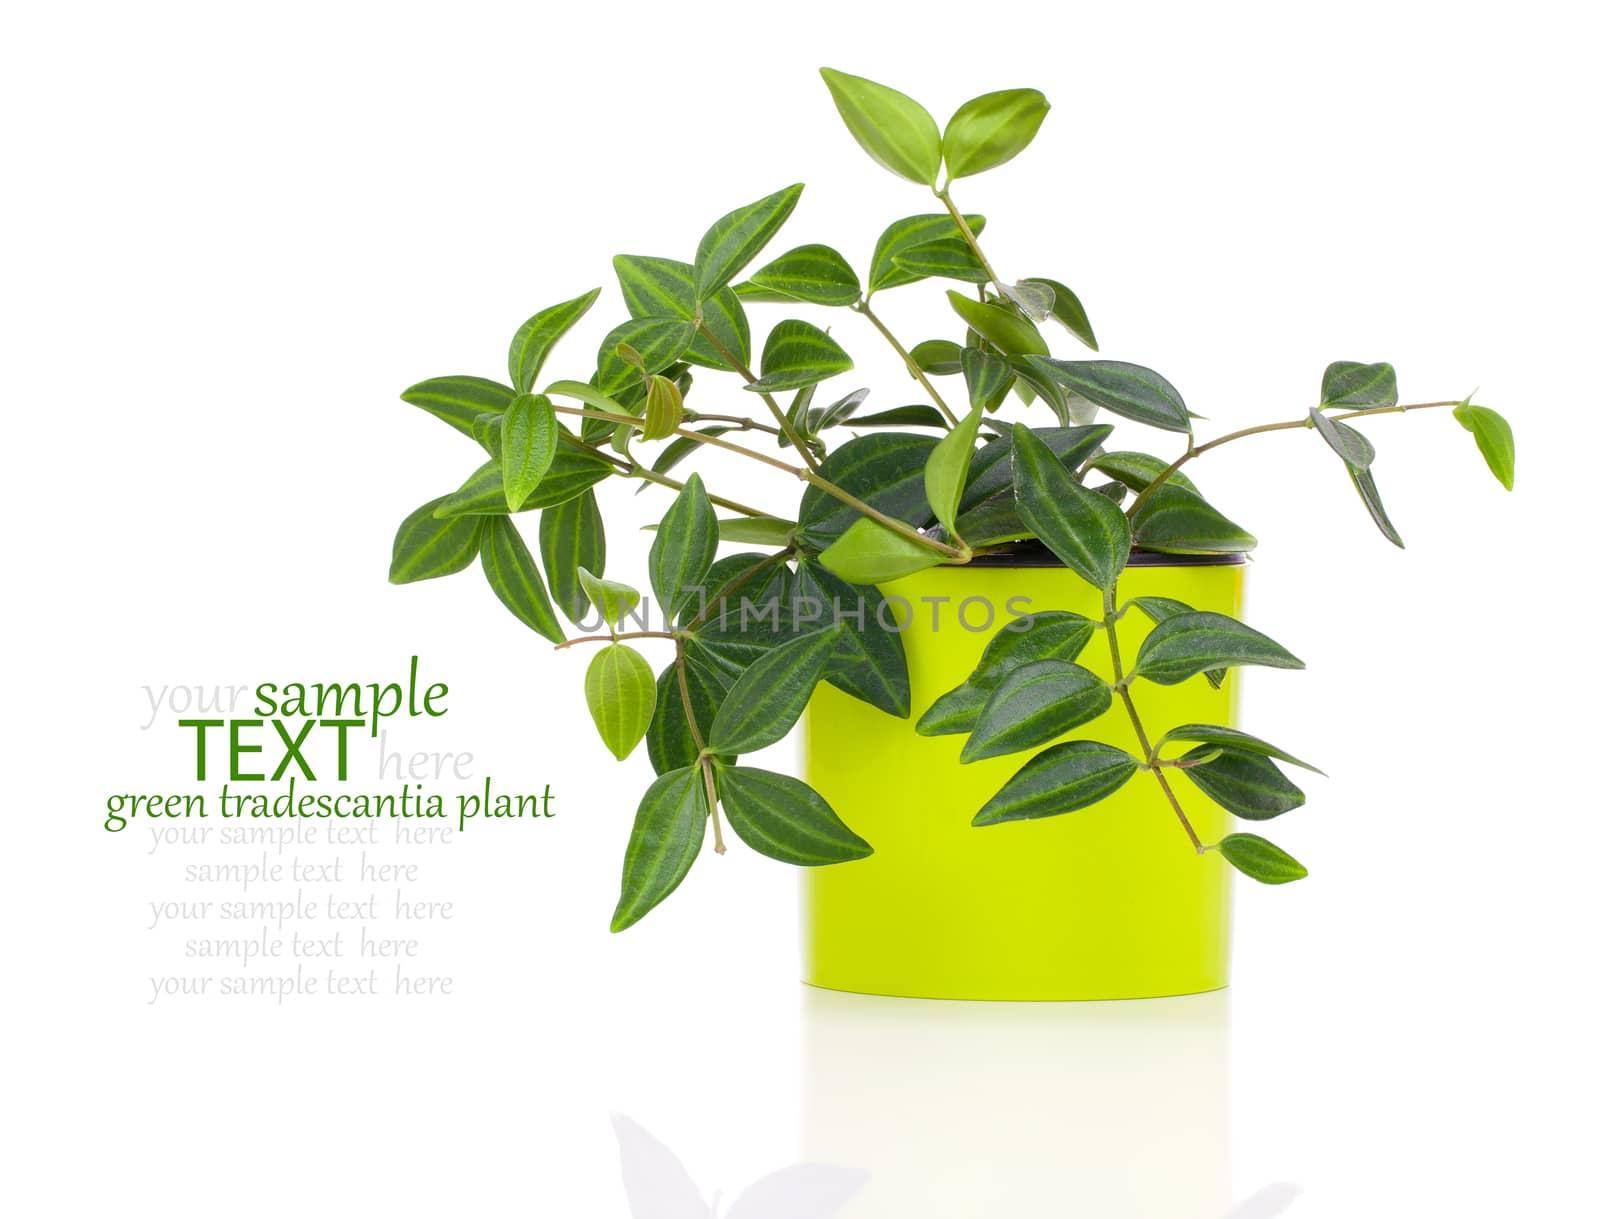 green tradescantia plant in pot, isolated on white background